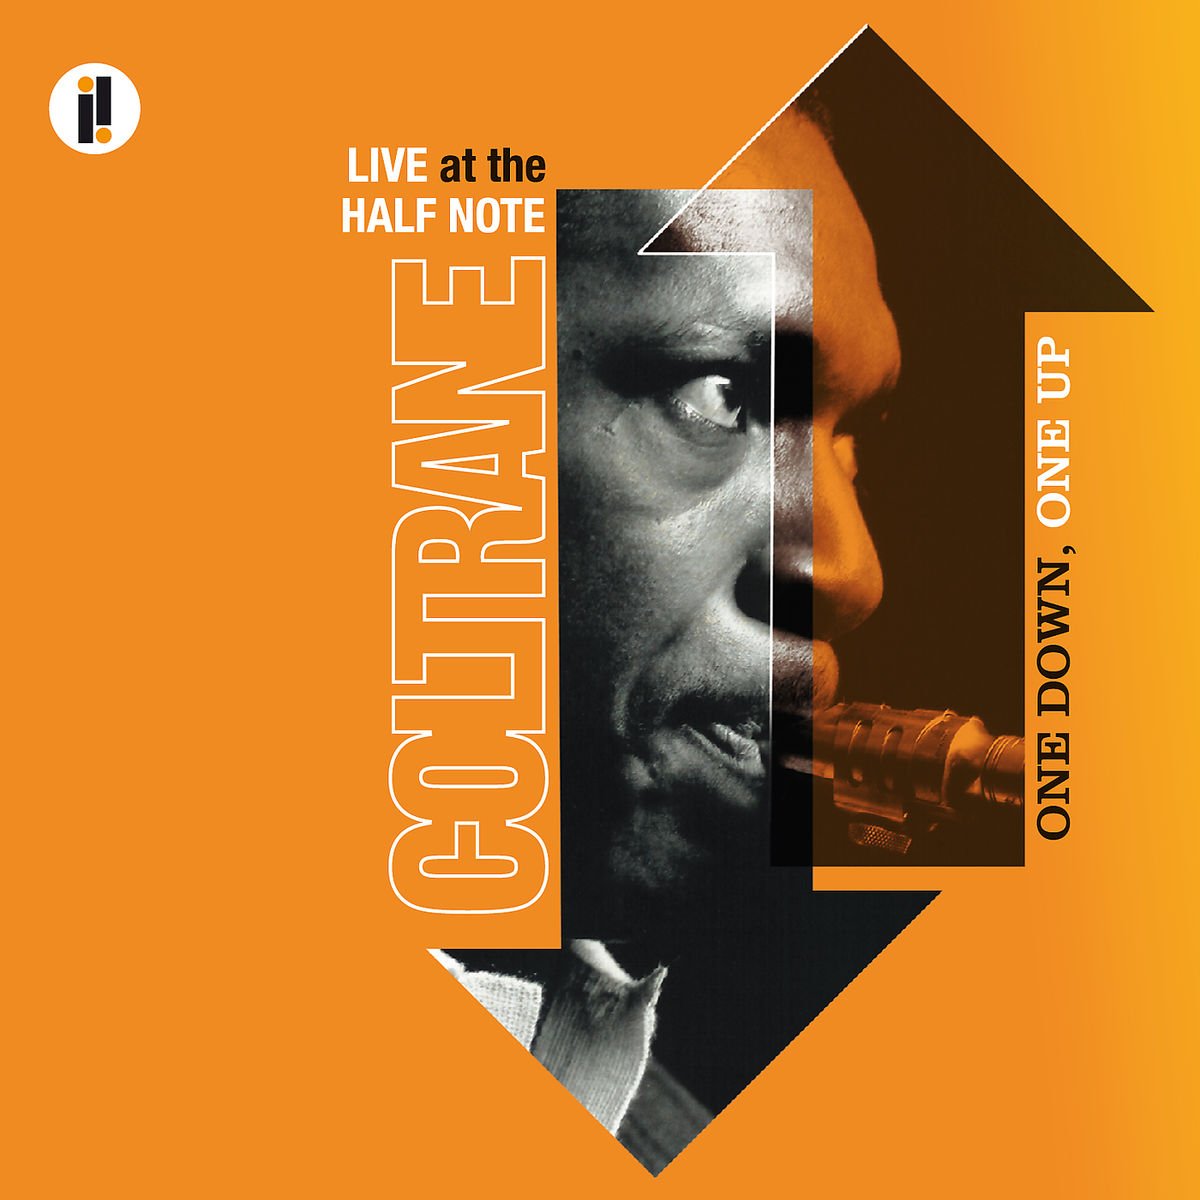 John Coltrane - Live at the Half Note: One Down, One Up